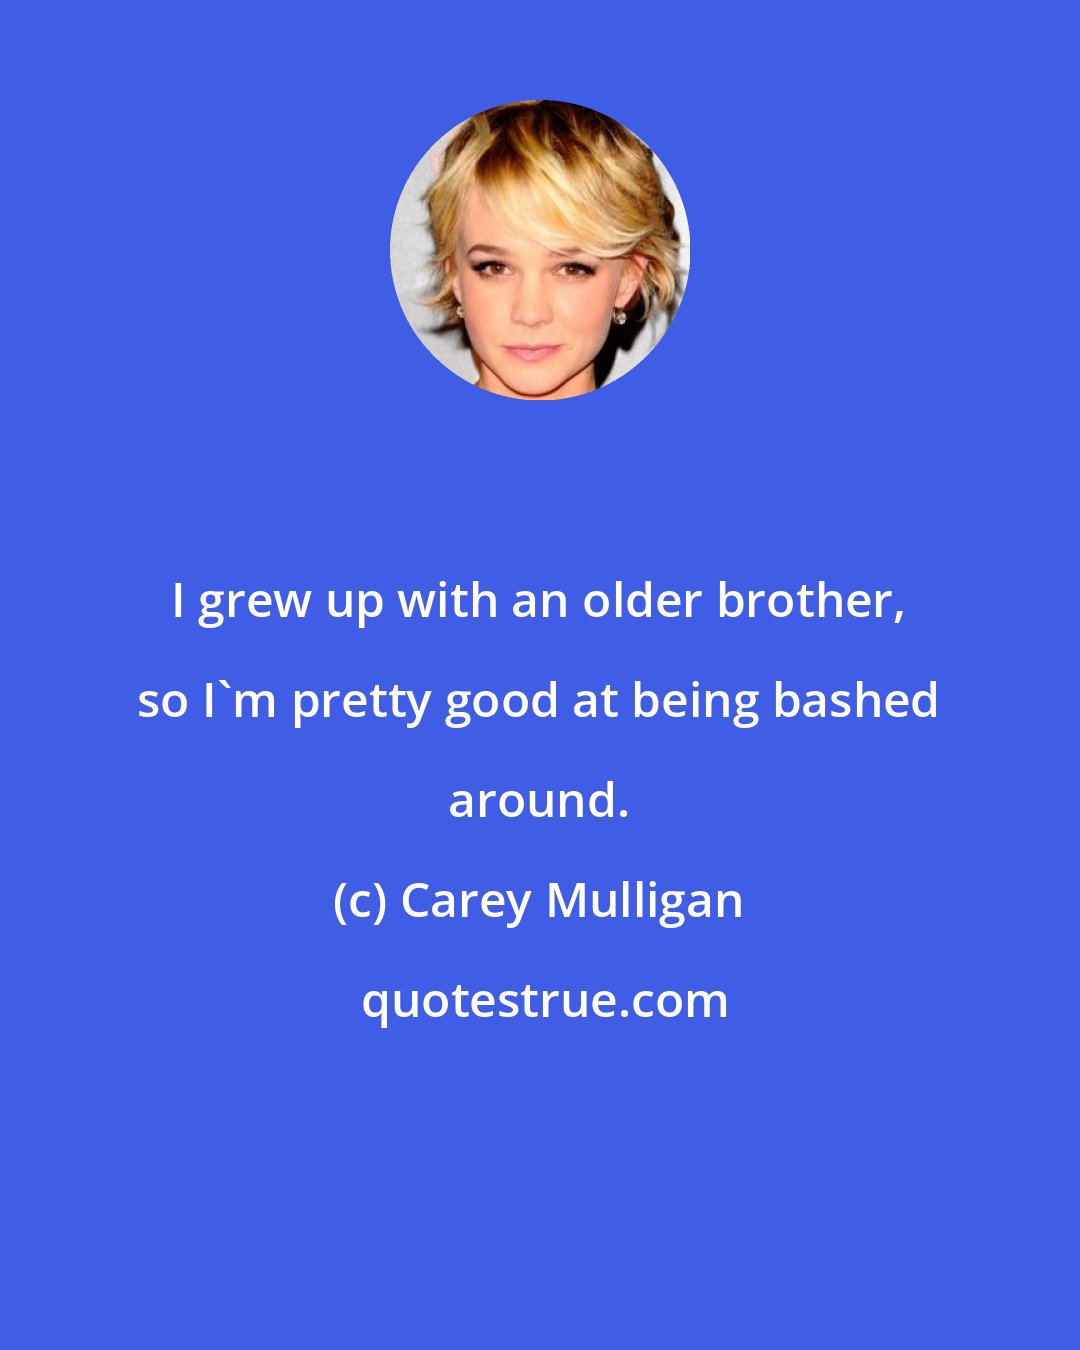 Carey Mulligan: I grew up with an older brother, so I'm pretty good at being bashed around.